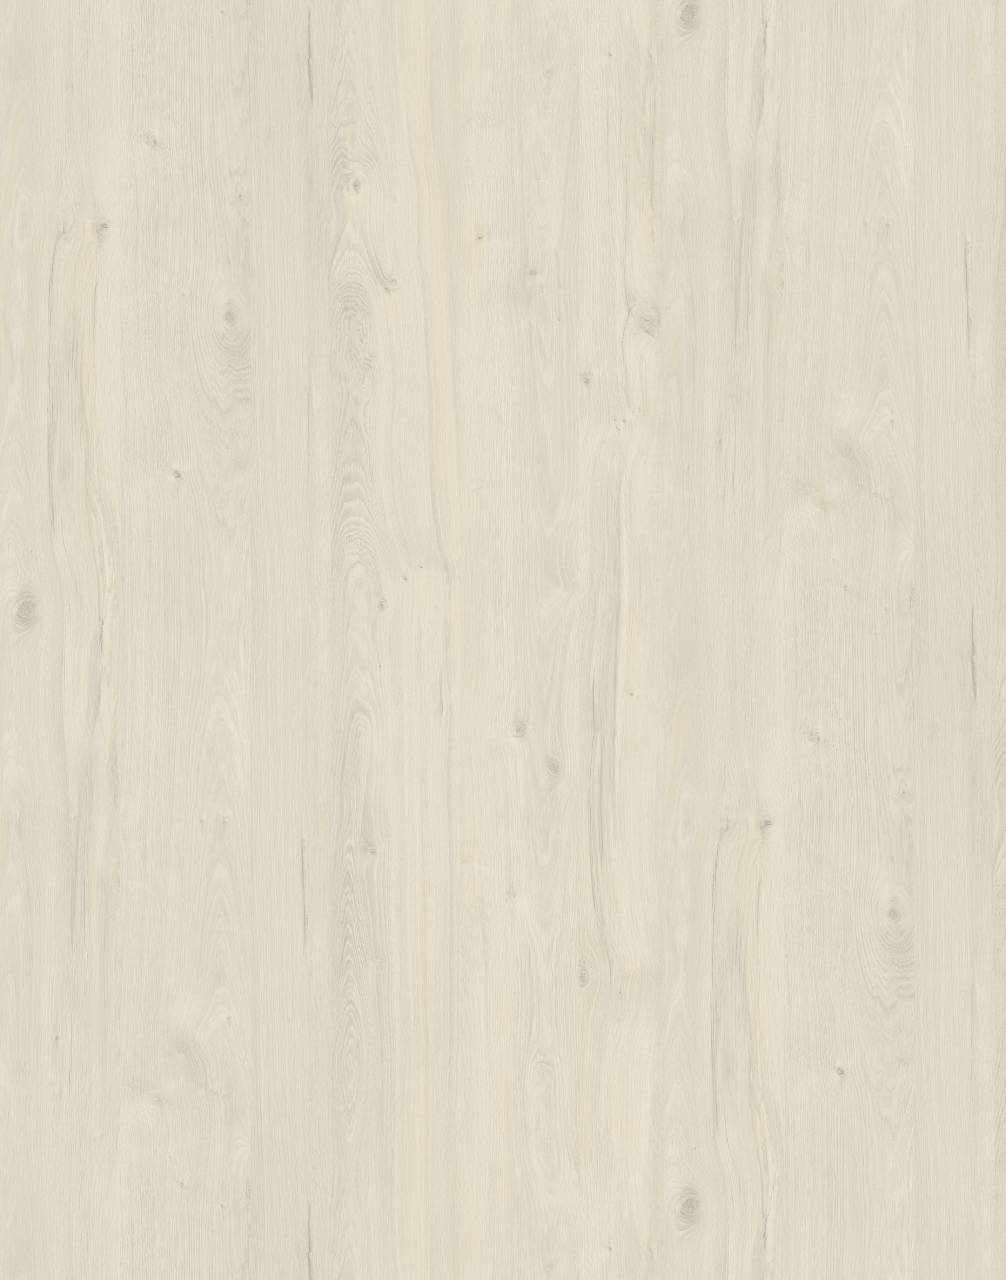 Satin Coastland Oak PW HPL with textured surface and light brown tones for a sophisticated and elegant look.